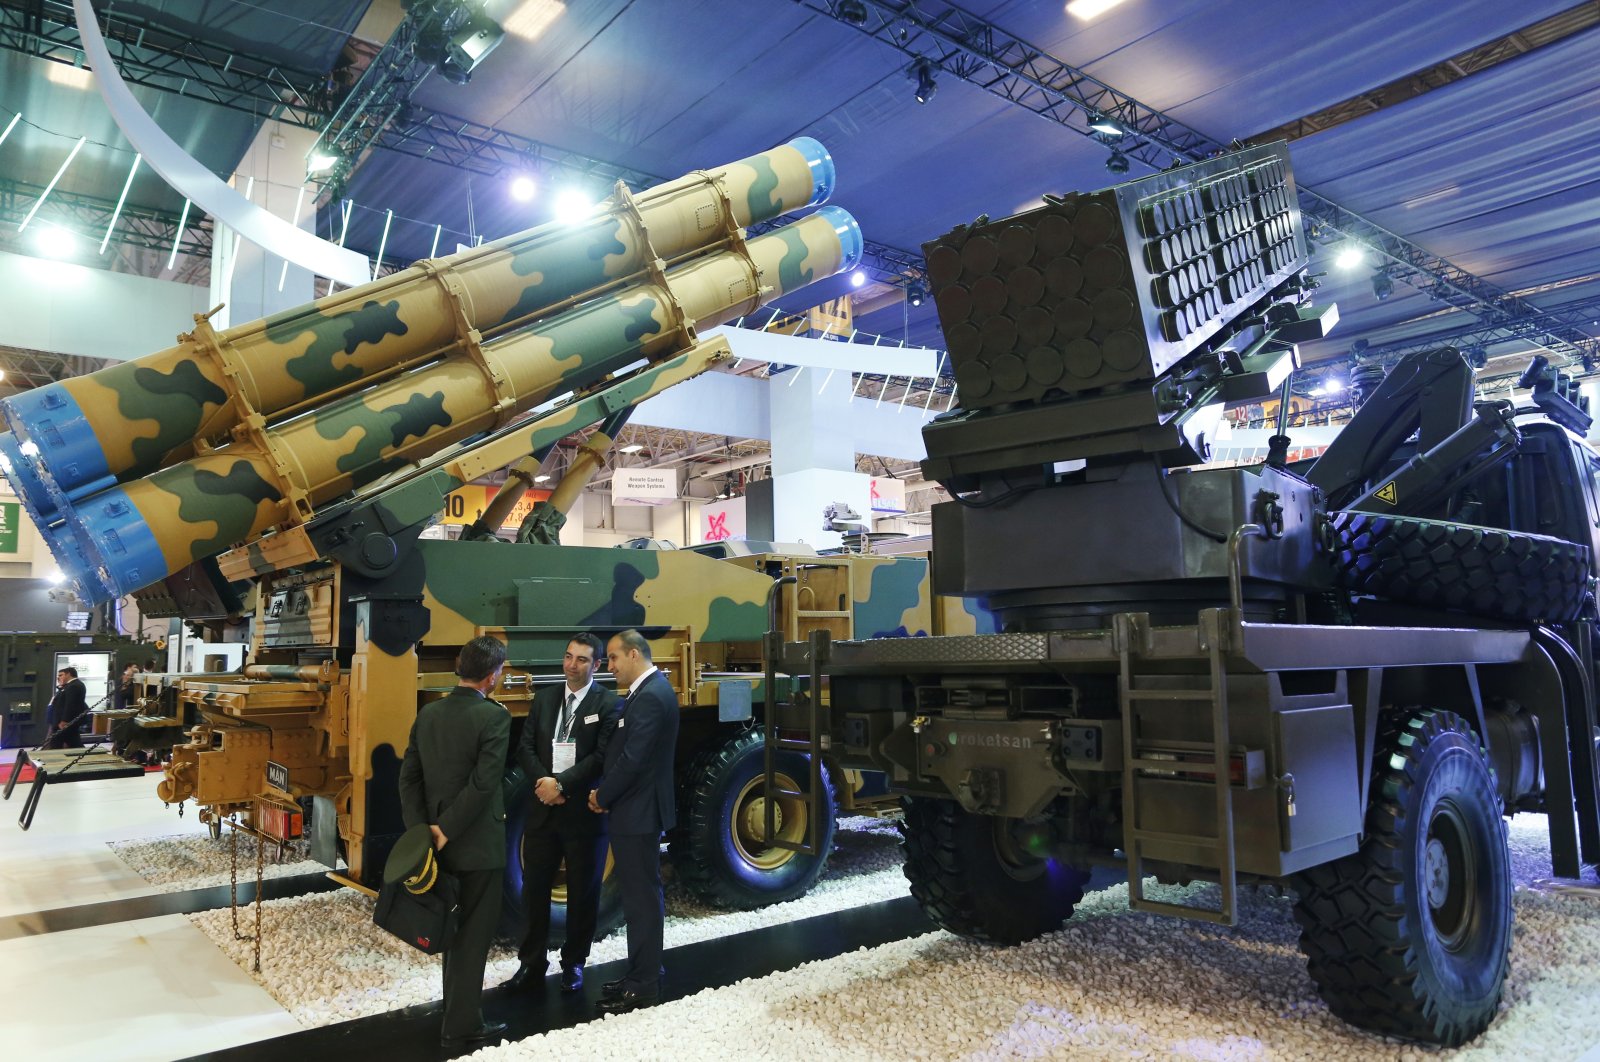 Visitors of the IDEF, the International Defense Industry Fair in Istanbul, talk next to Turkish-made rocket launchers, Wednesday, May 10, 2017. (AP File Photo)